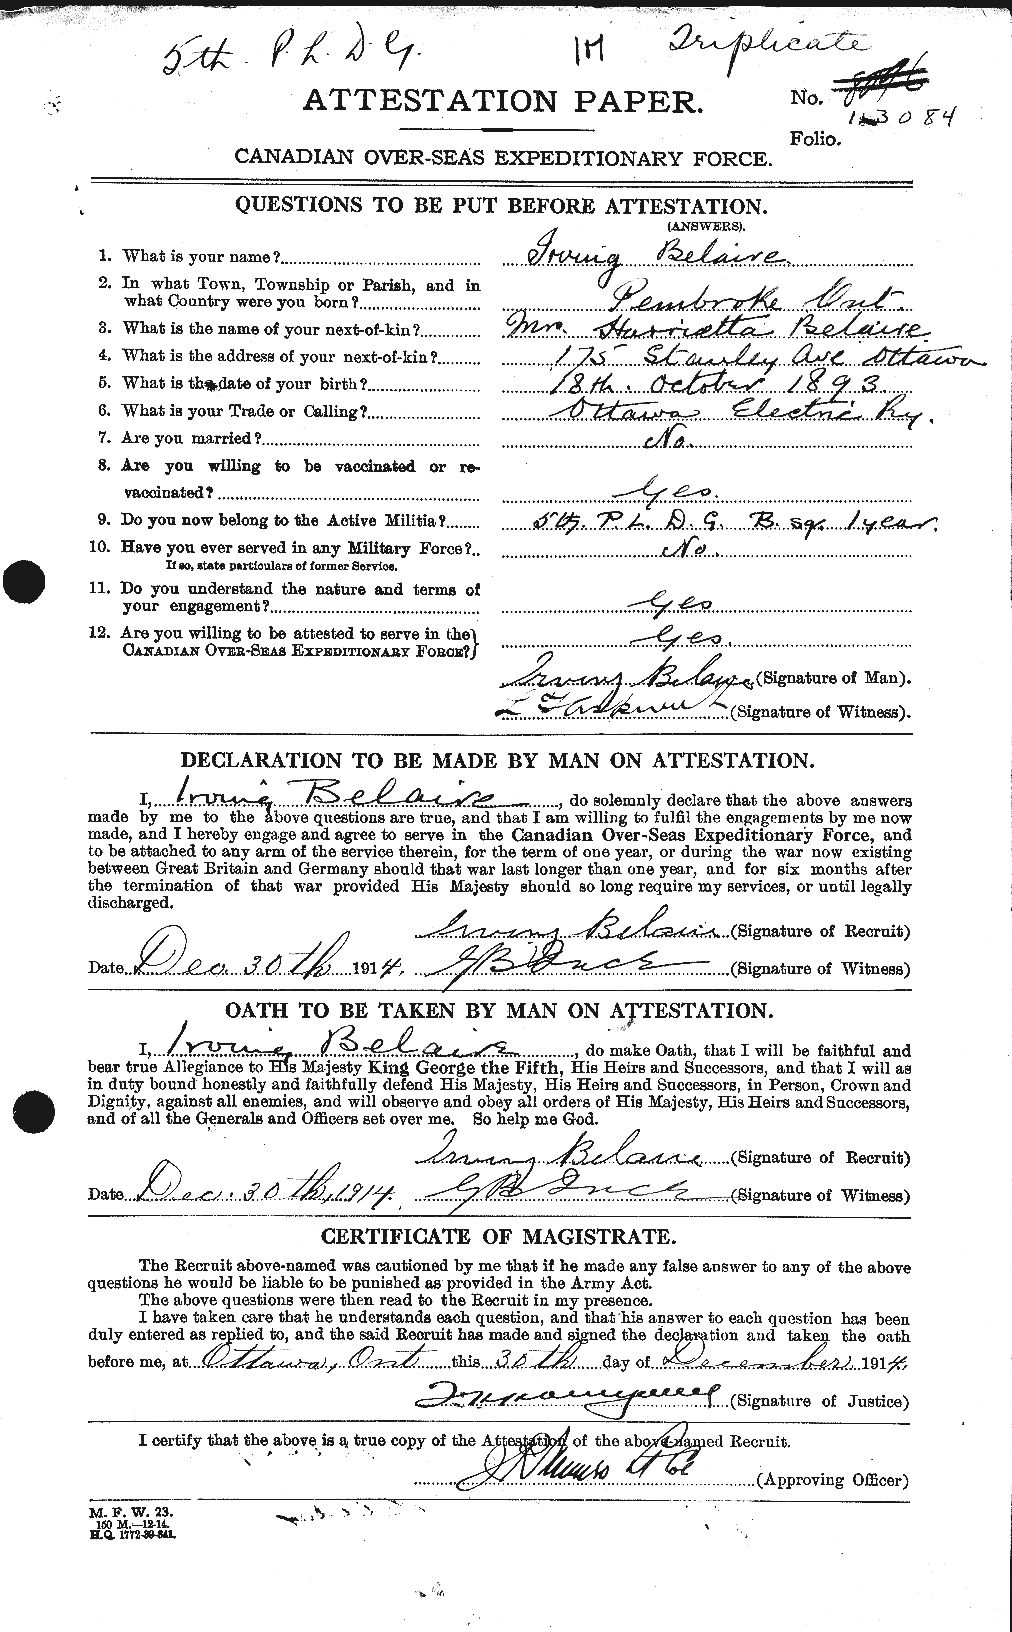 Personnel Records of the First World War - CEF 228445a